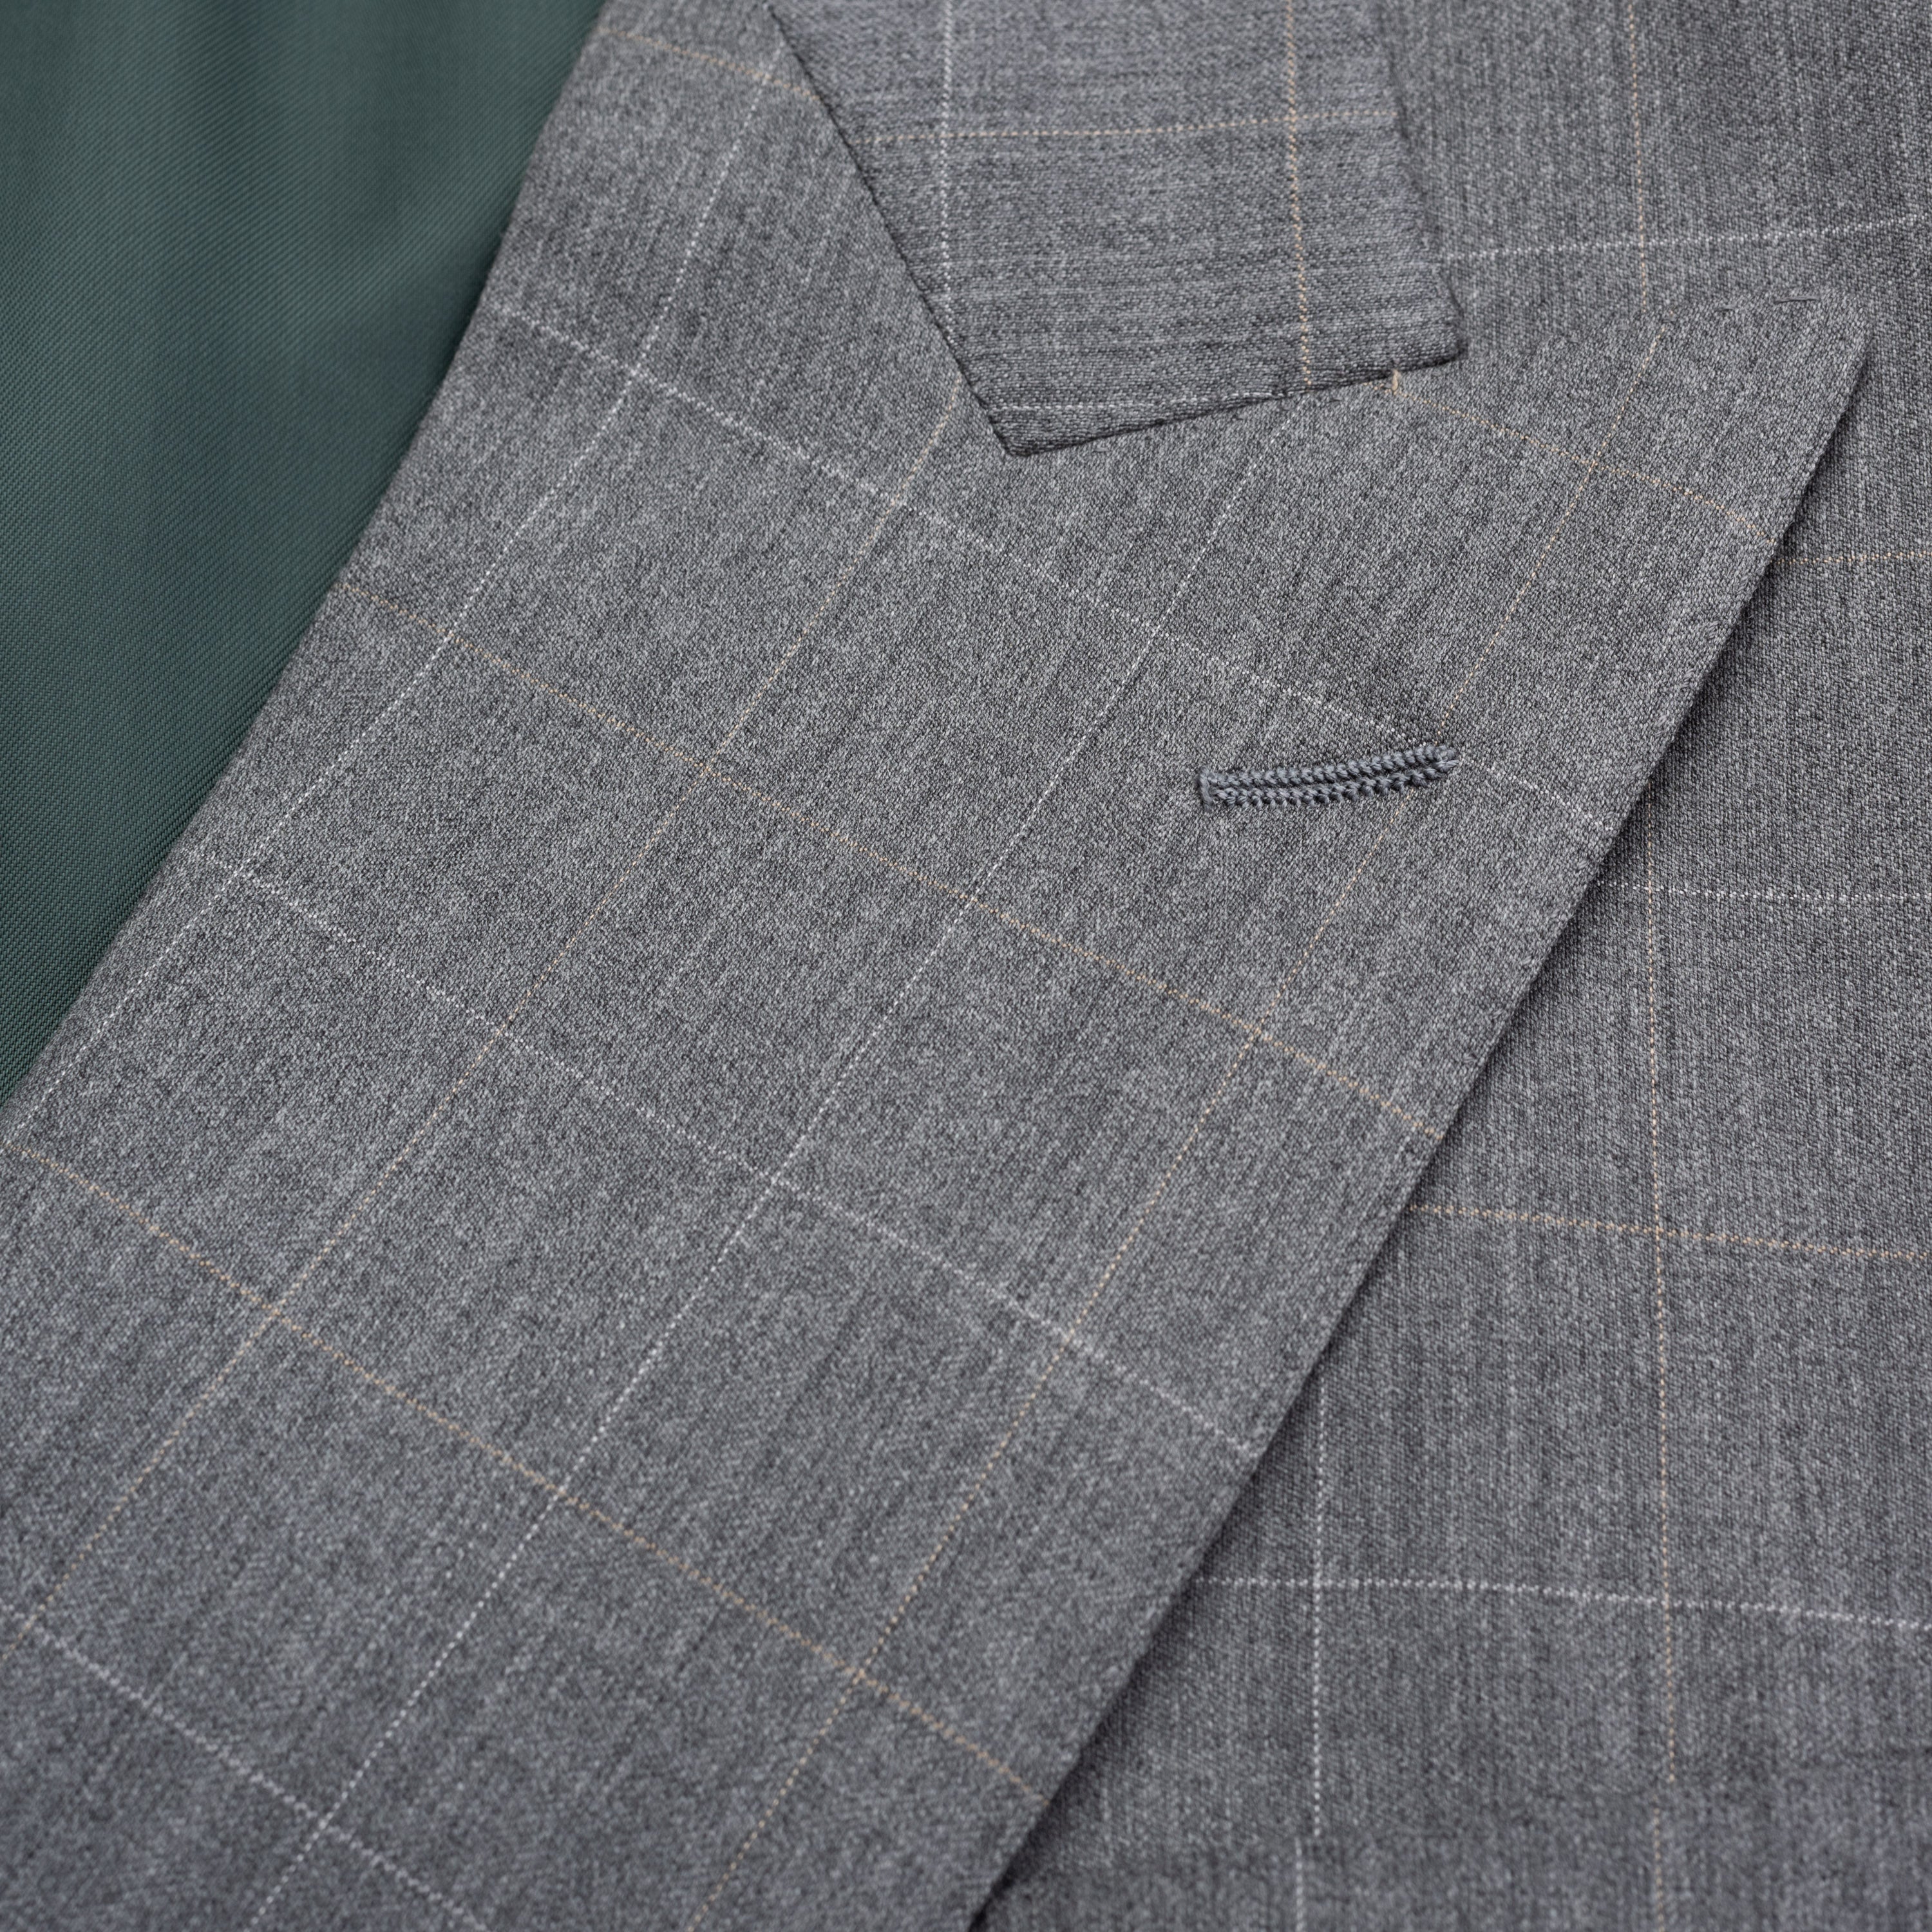 CASTANGIA 1850 Gray Wool Double Breasted Jacket EU 54 NEW US 44 CASTANGIA